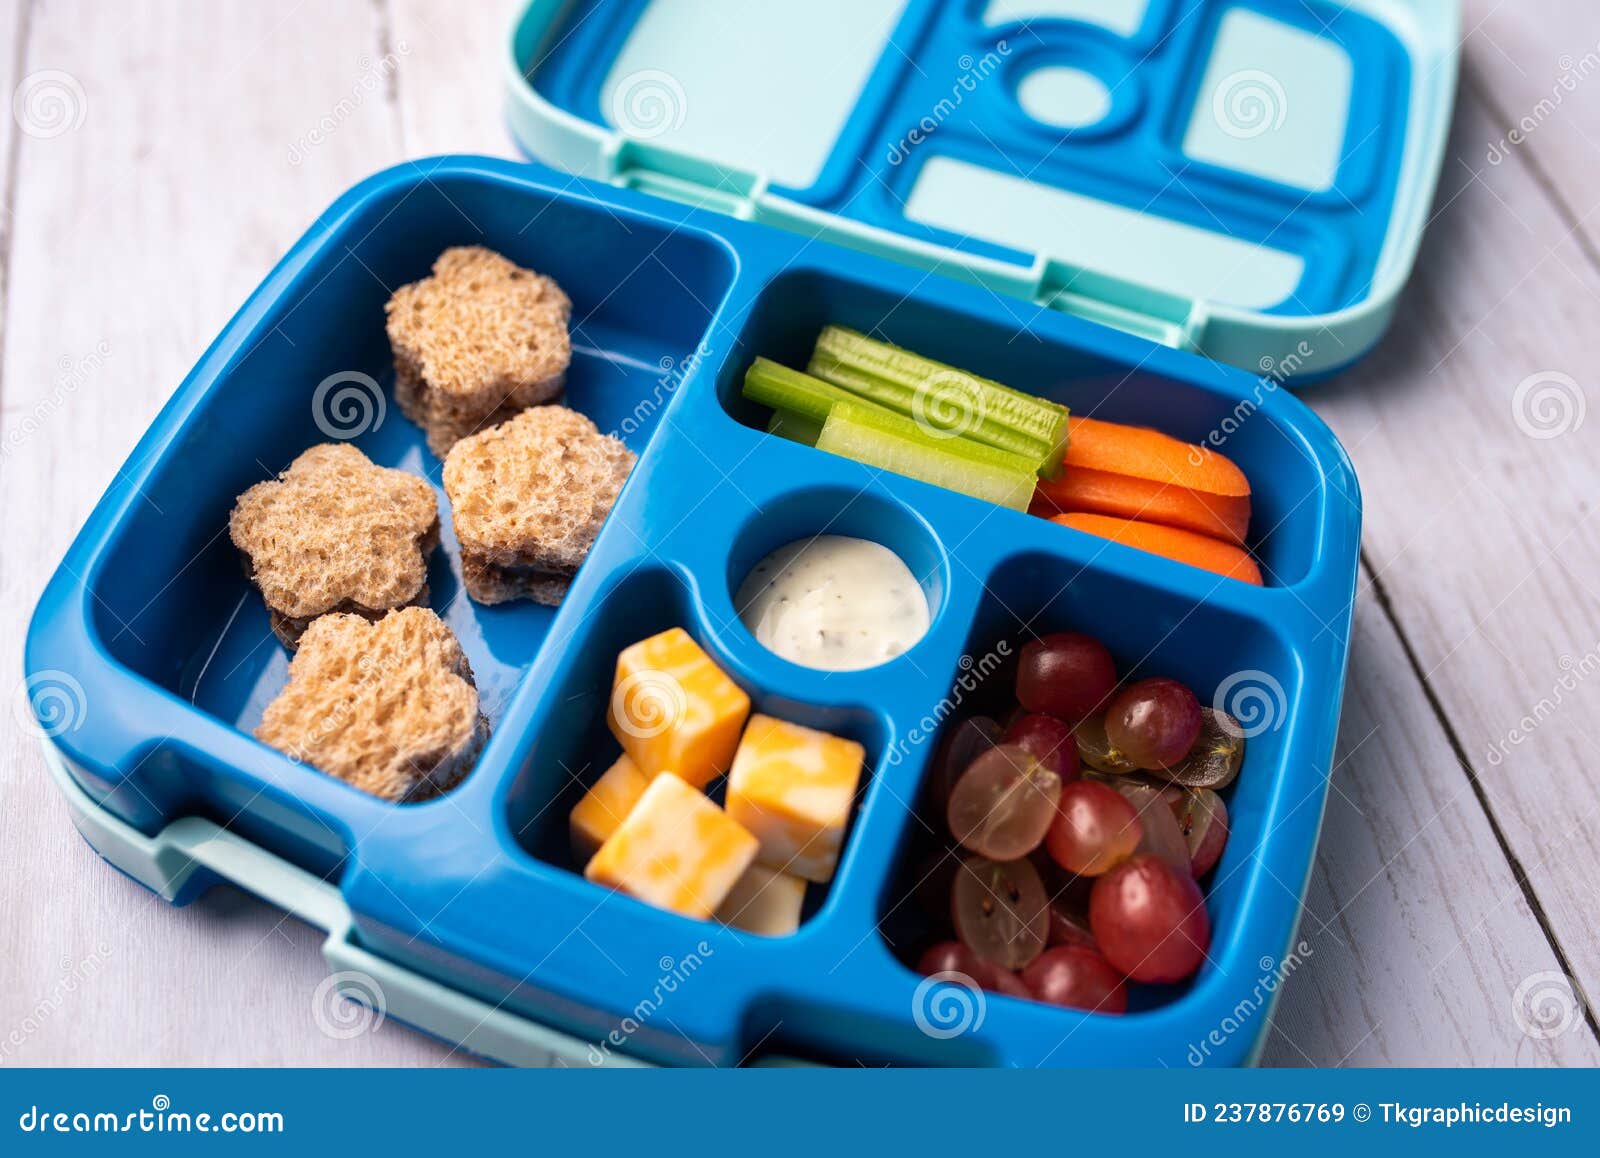 Toddler Lunch Ideas  Daycare Lunch Kit 